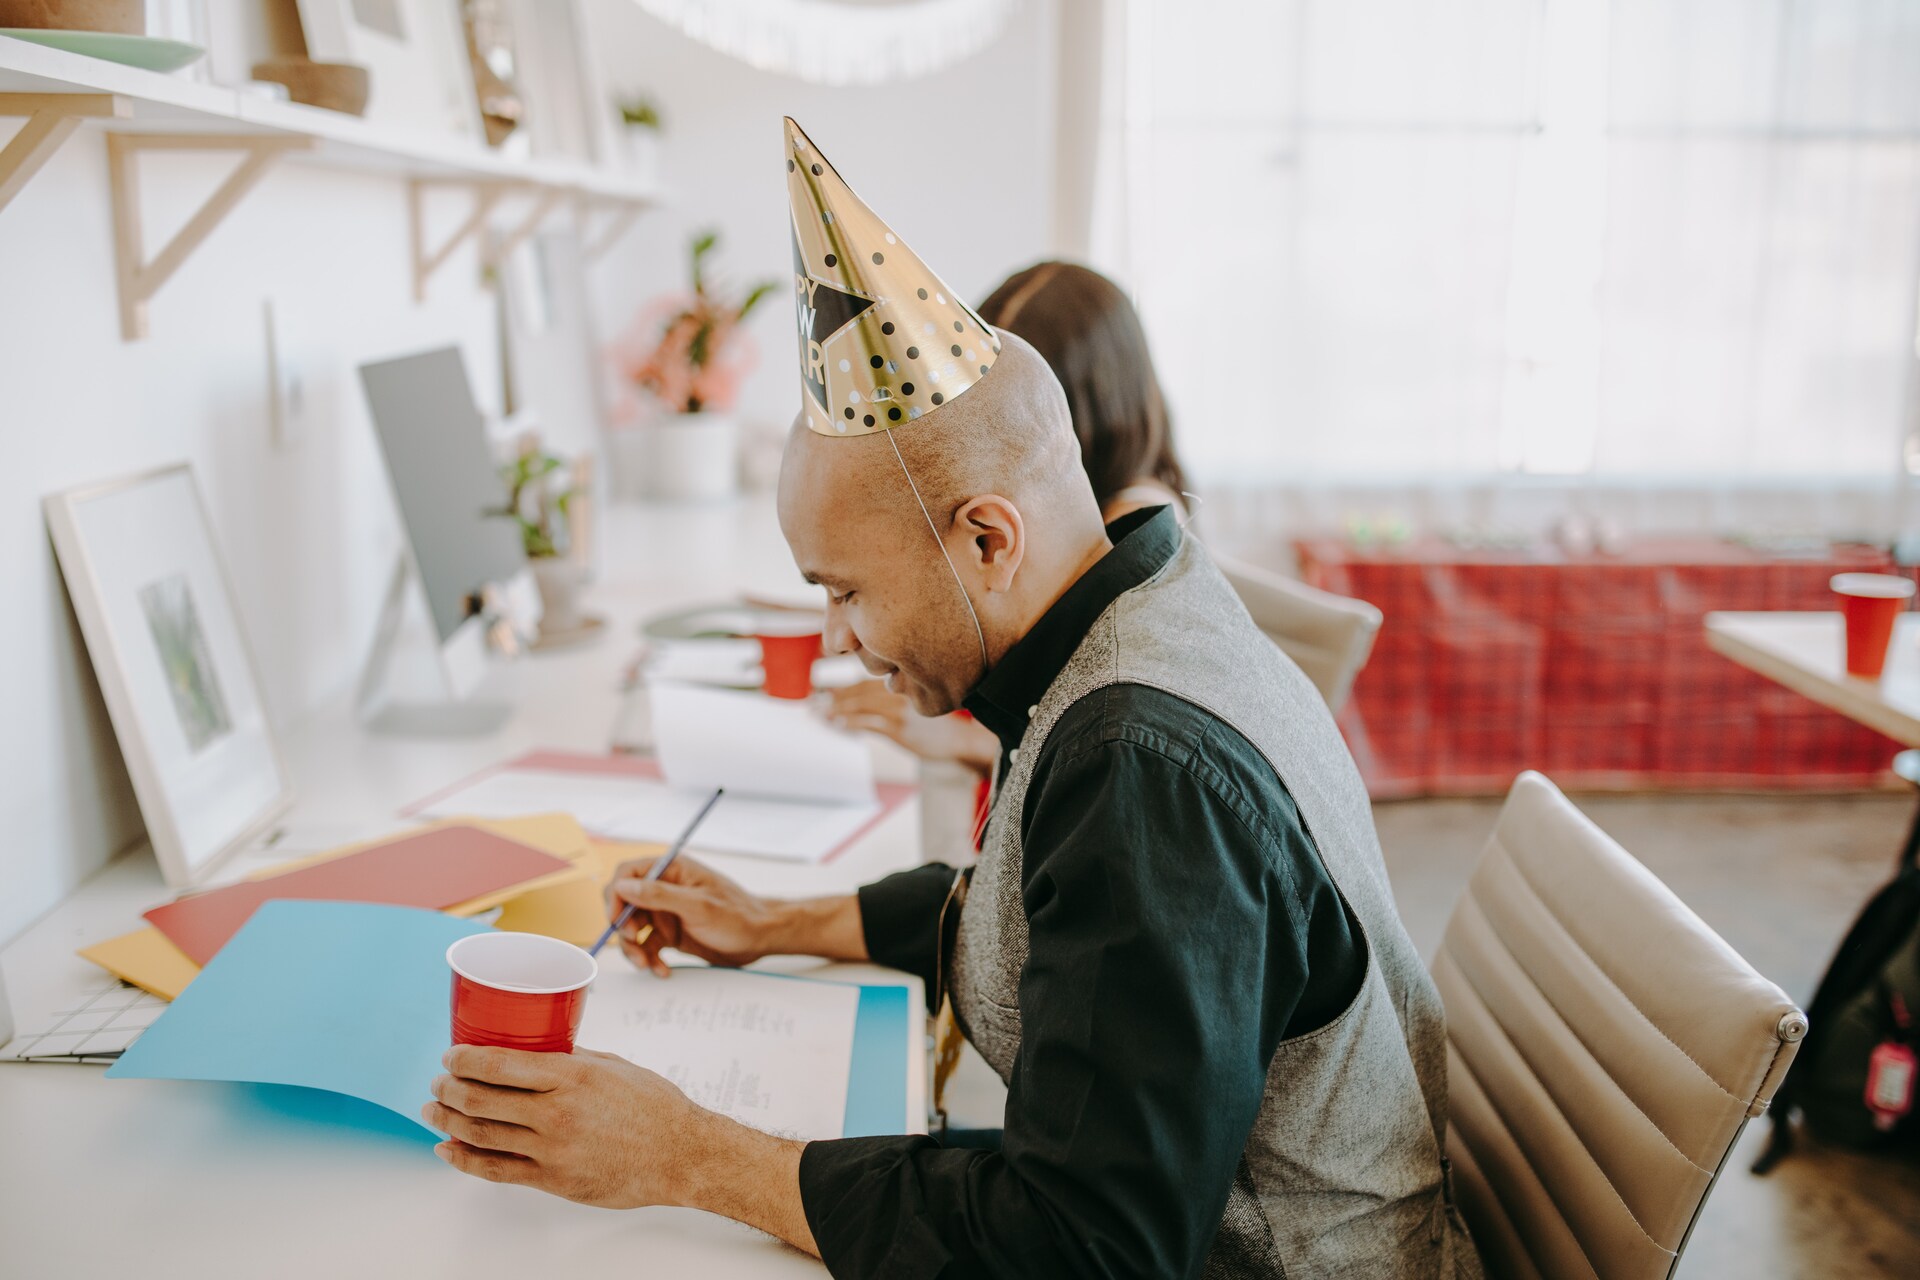 Man with a party hat planning an event